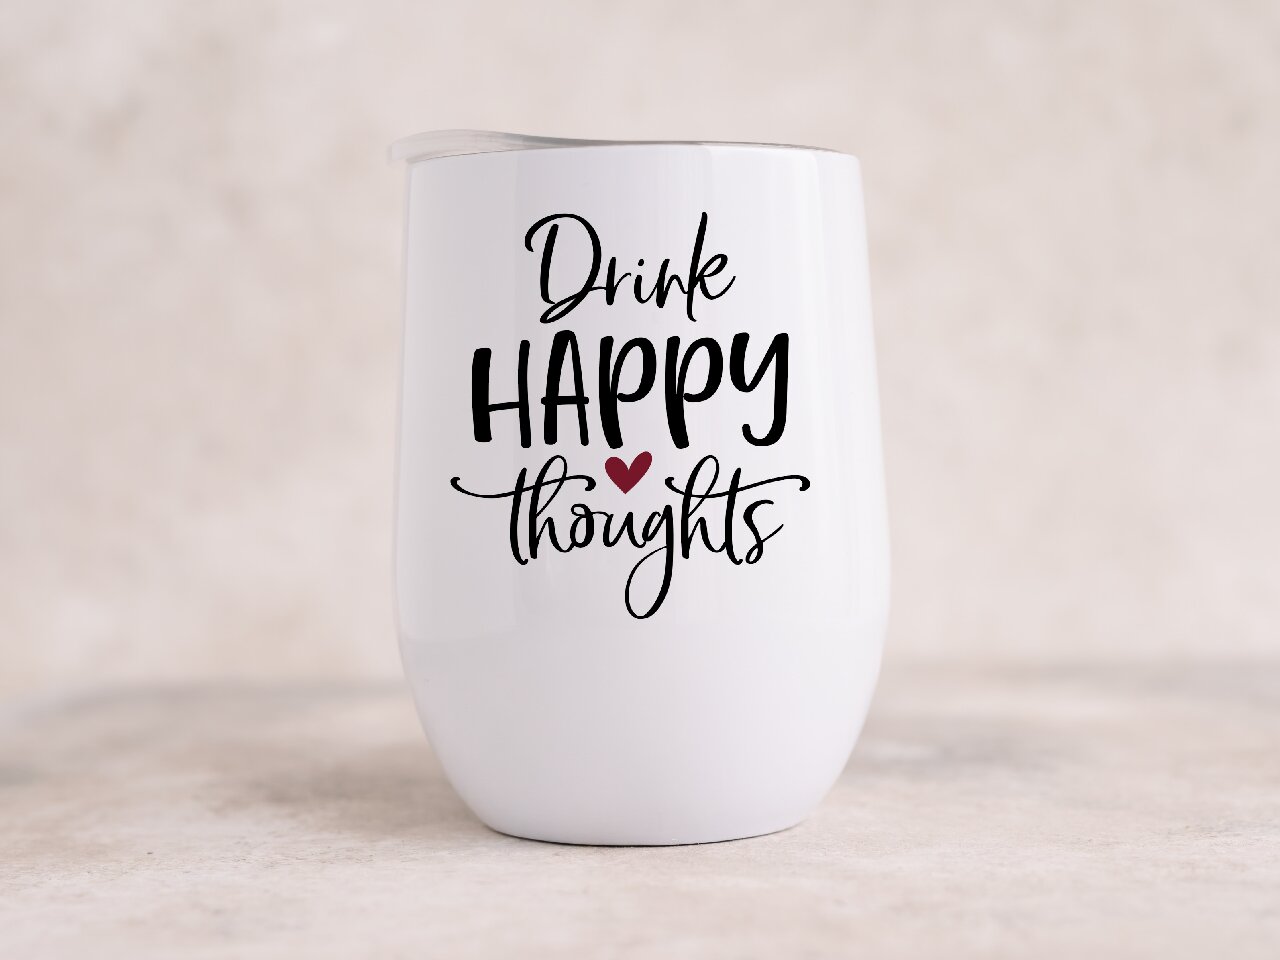 Drink Happy Thoughts 2 - Wine Tumbler